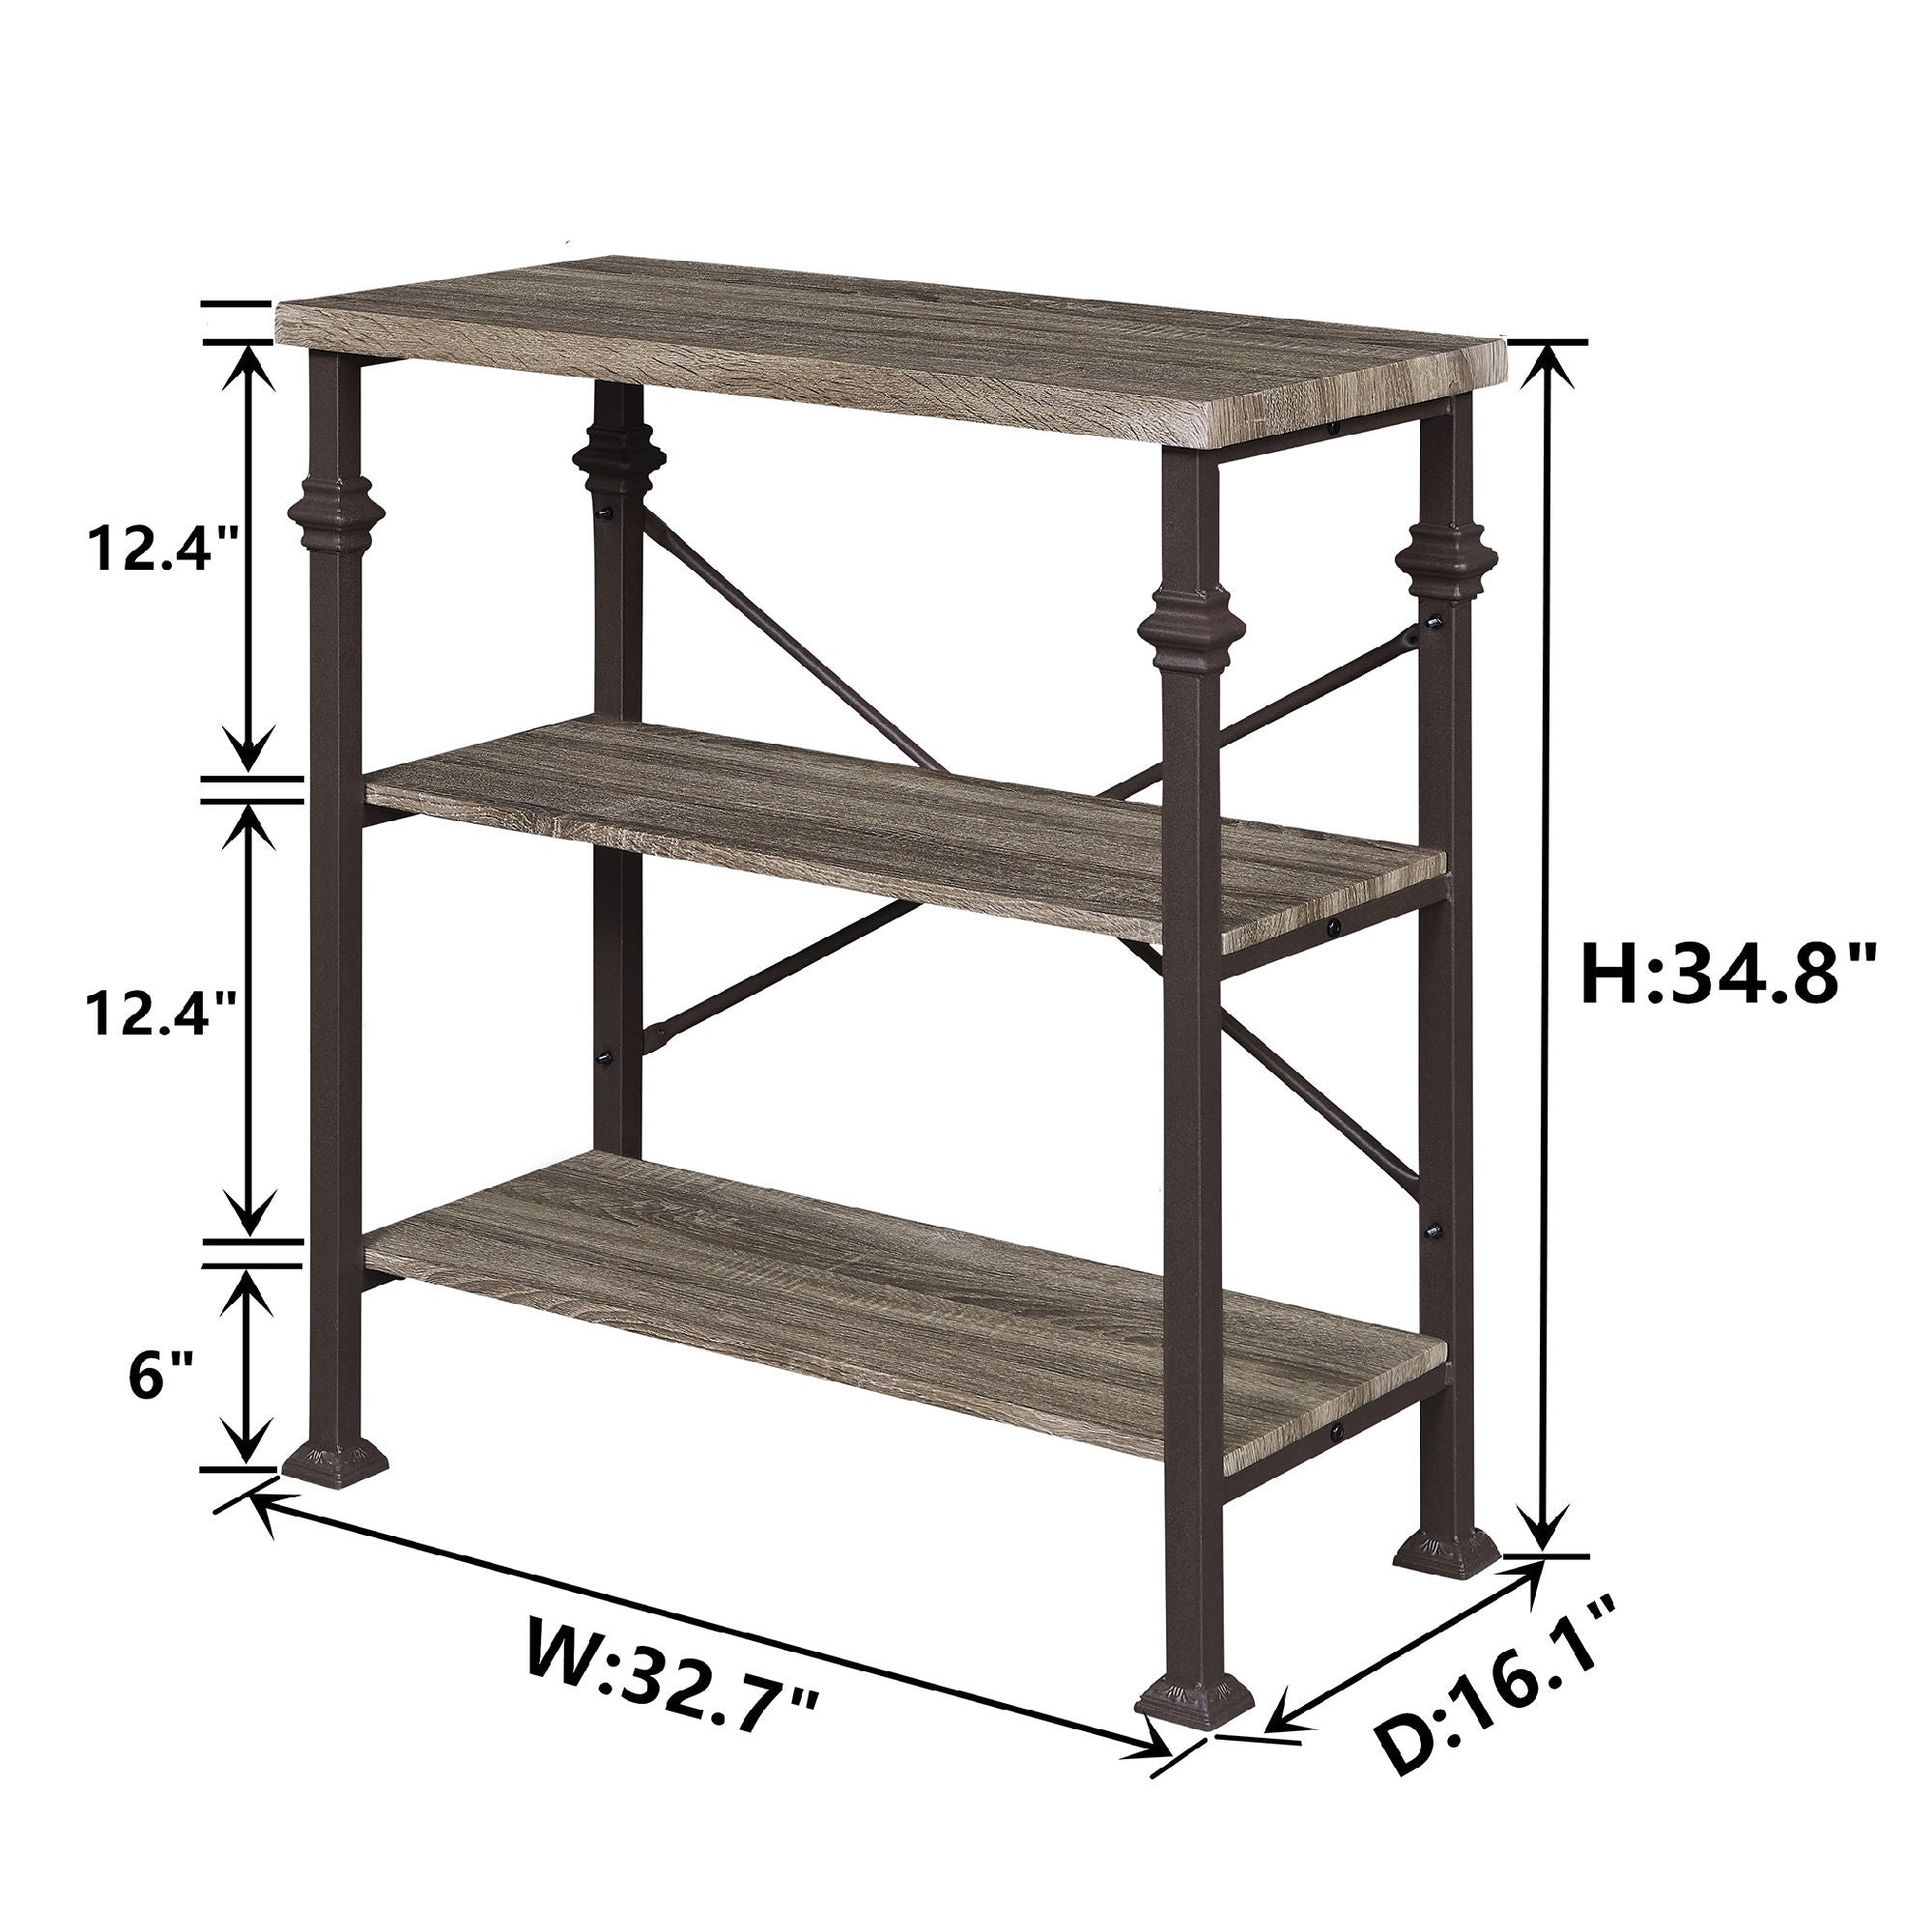 Free shipping 3-Tier Bookshelf, Rustic Industrial Style Bookcase Furniture, Free Standing Storage Shelves for Living Room Bedroom and Kitchen, Grey Oak